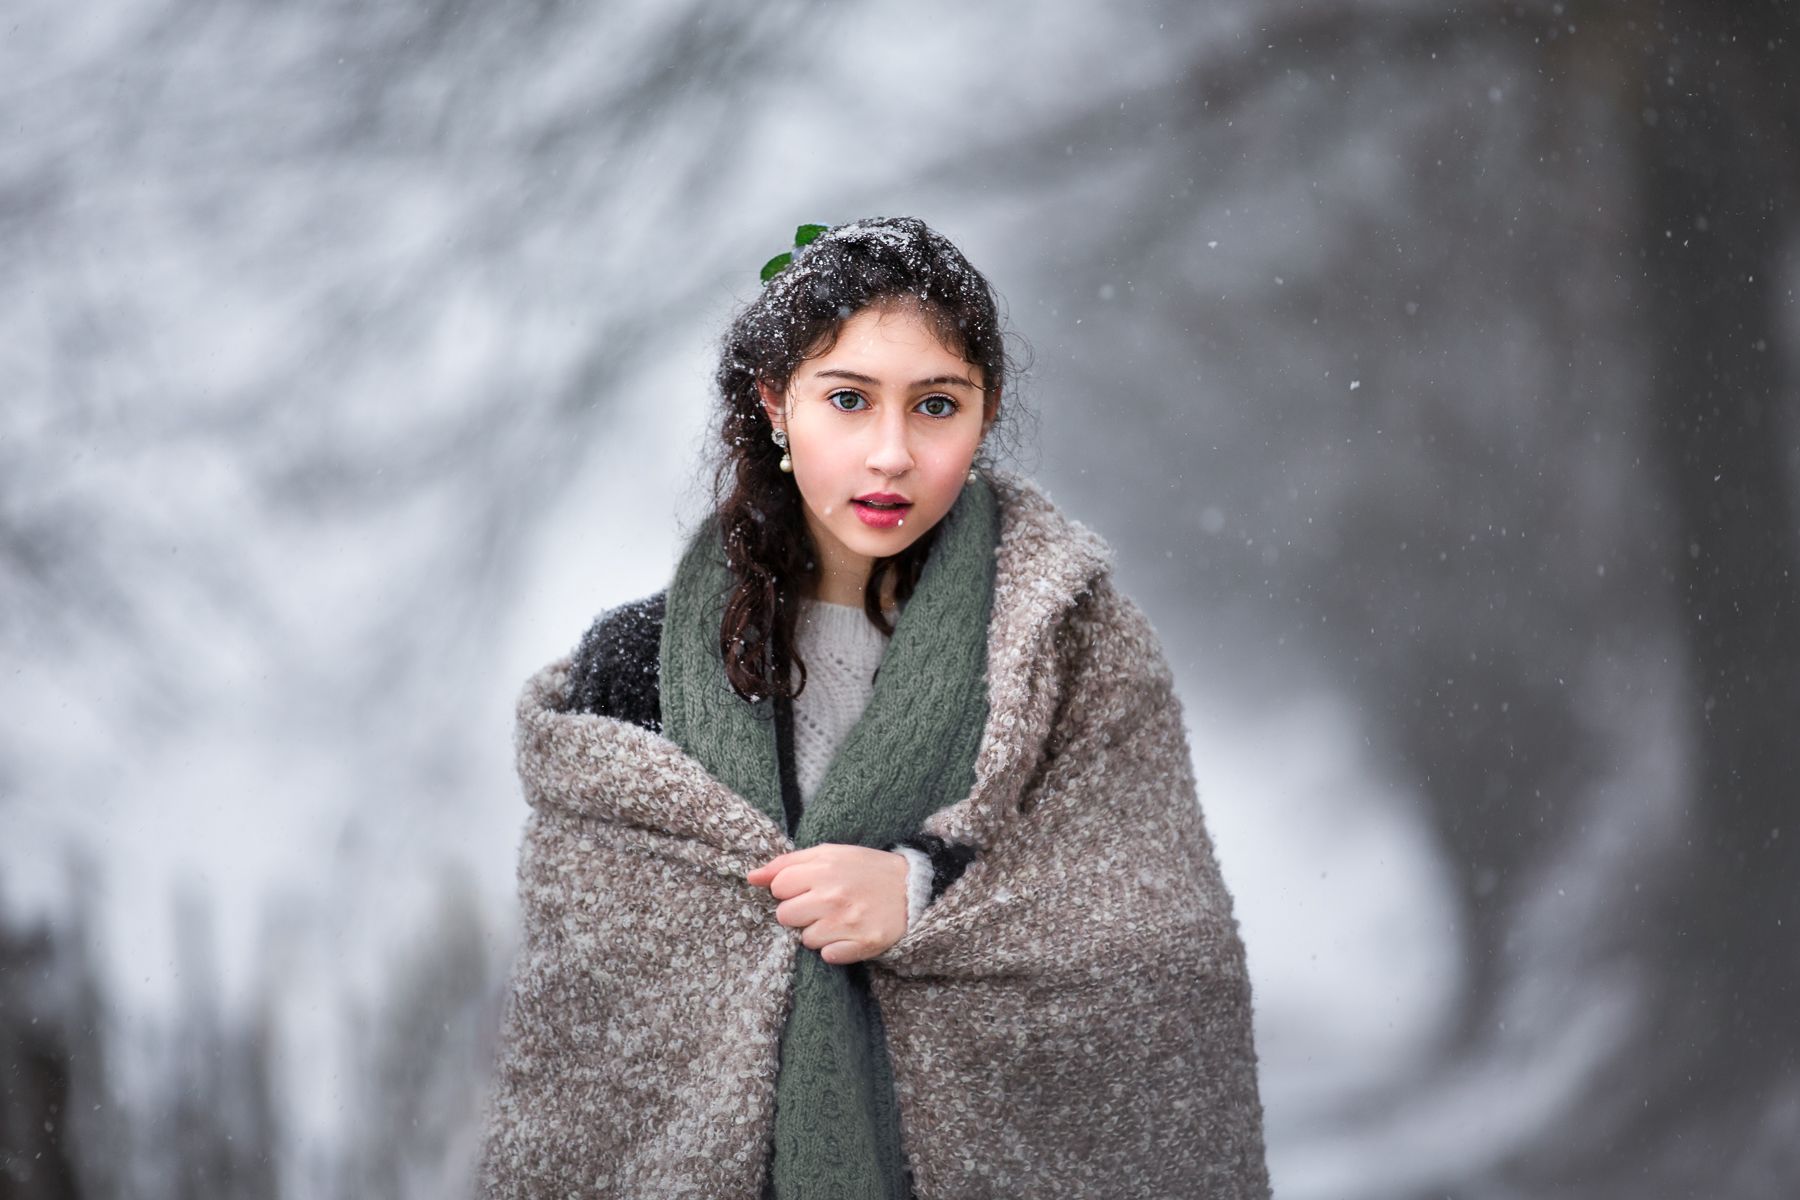 An award-winning teen portrait by Carthage, North Carolina photographer Heather Tristan for Laughing Magpies Photography. The image shows a young teen girl dressed warmly in a thick woolen sweater, coat, and scarf, and wrapped in a rustic-textured blanket. She stands alone on a snowy lane as the snow falls softly on and around her, collecting in white drifts on her head and shoulders. A monochromatic tree behind her and to her left creates a tunnel-like space that creates an even more mystical feeling for this magical snow portrait.